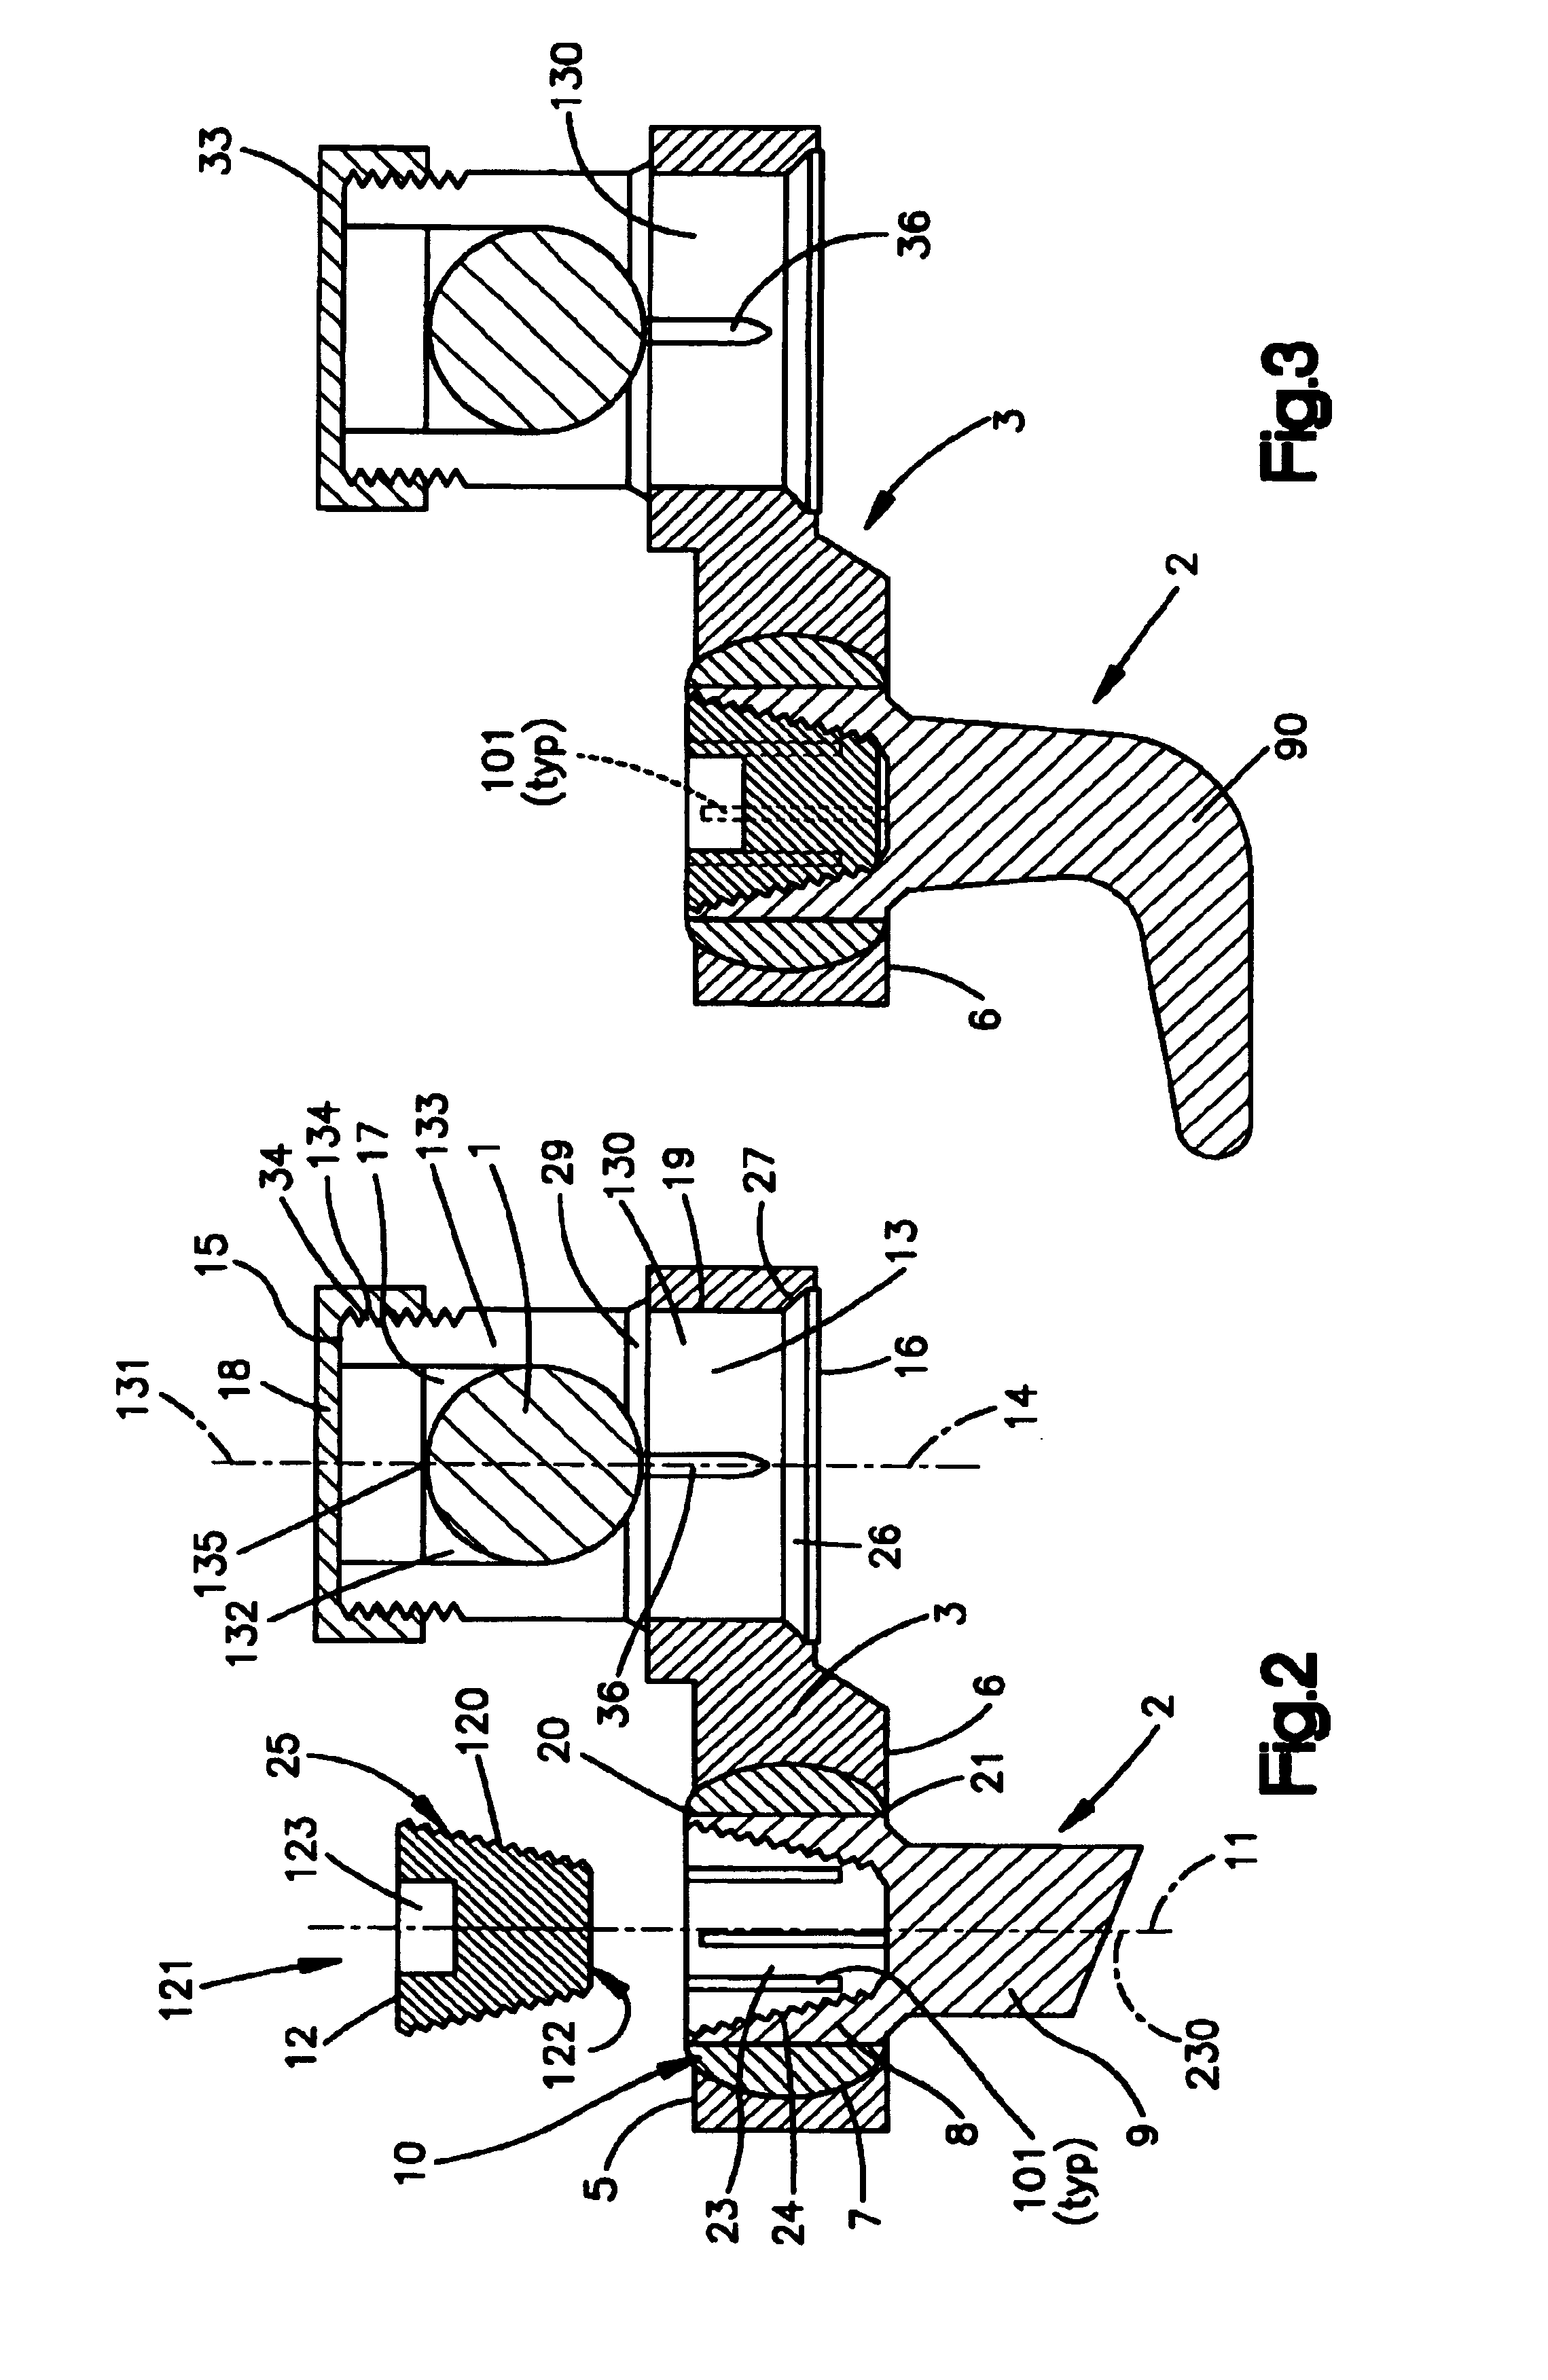 Apparatus for connecting a bone fastener to a longitudinal rod